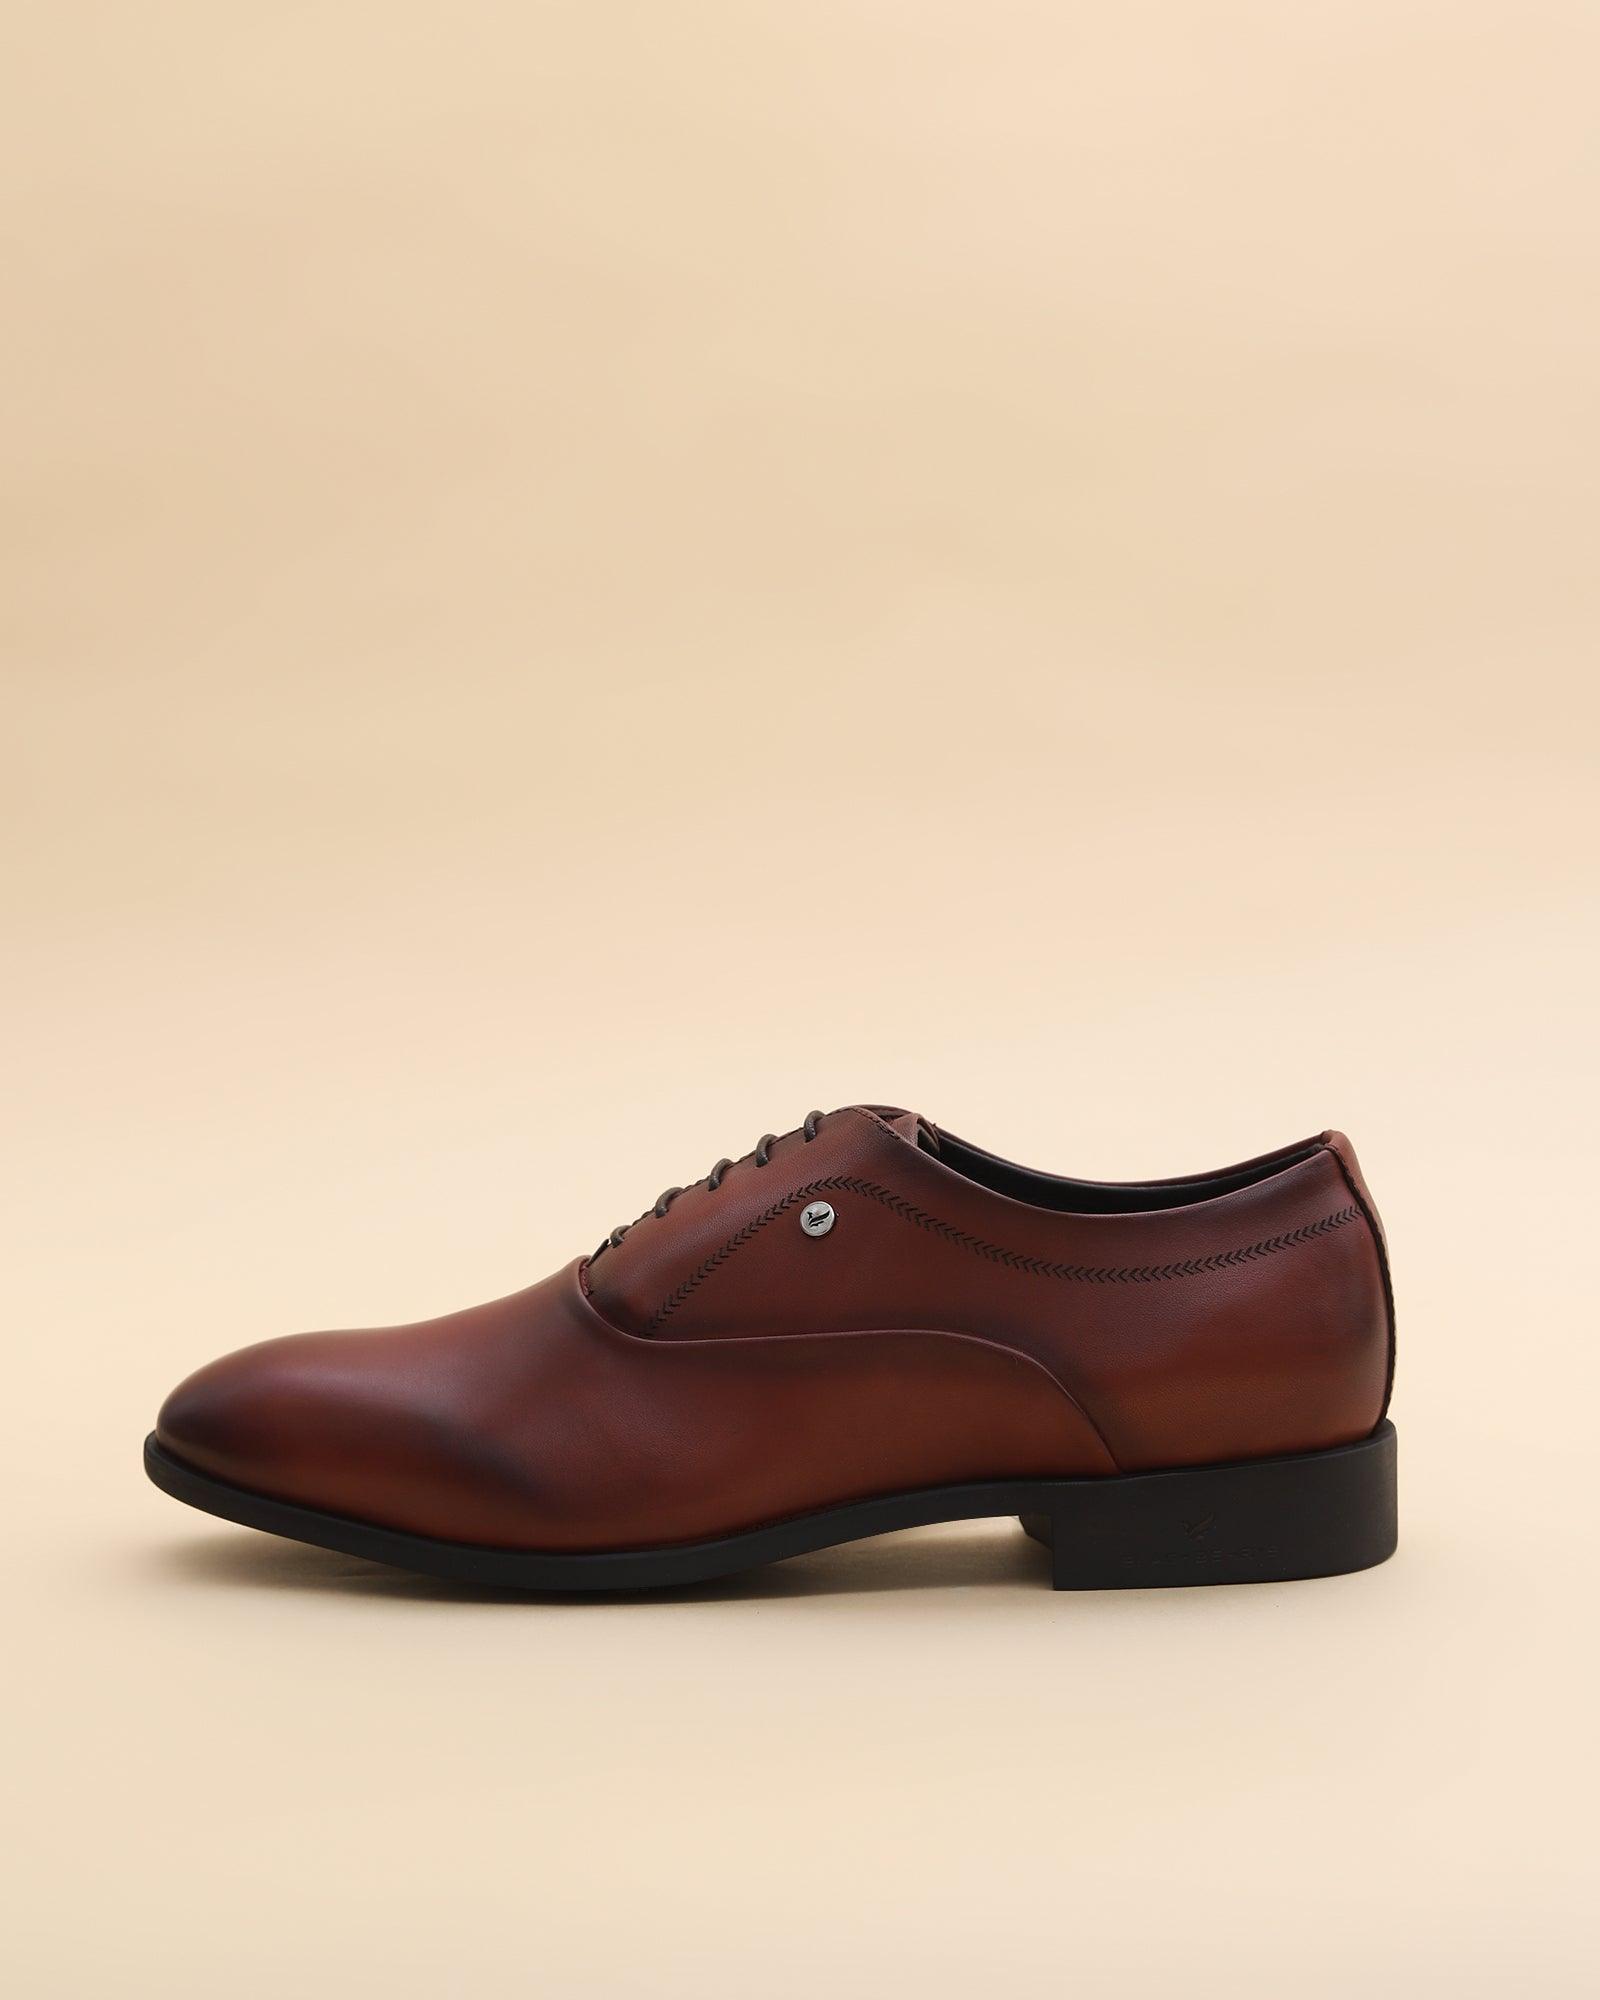 Leather Burgandy Solid Oxford Shoes - Lebum